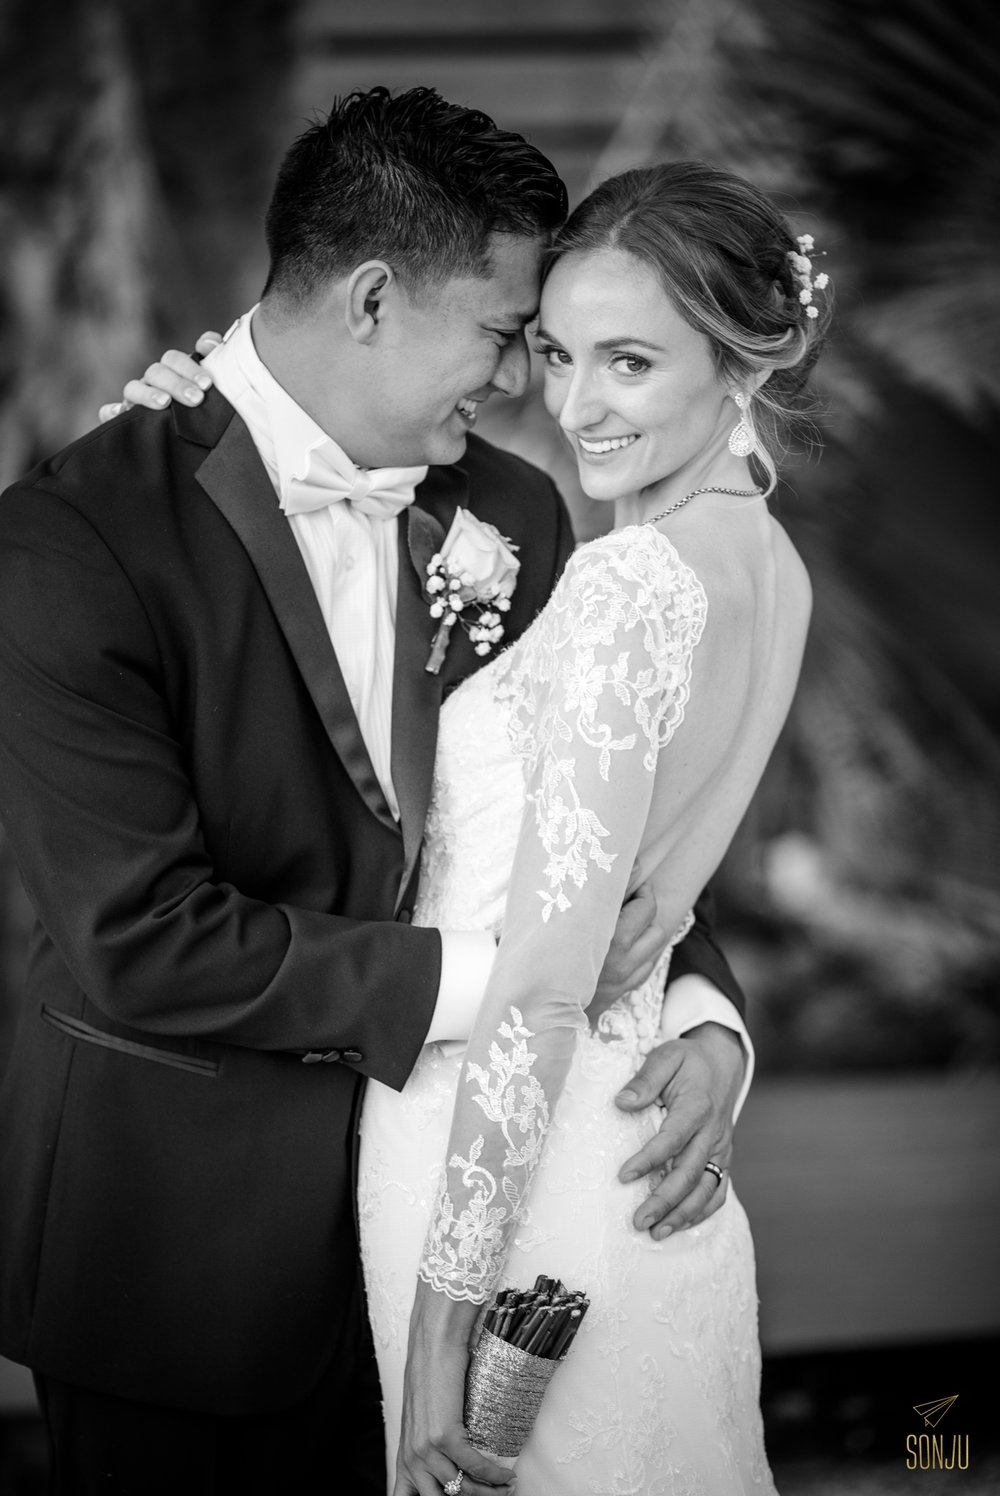  Bride and groom portrait at the Historic Stranahan House &amp; Museum in Ft Lauderdale Florida&nbsp; 